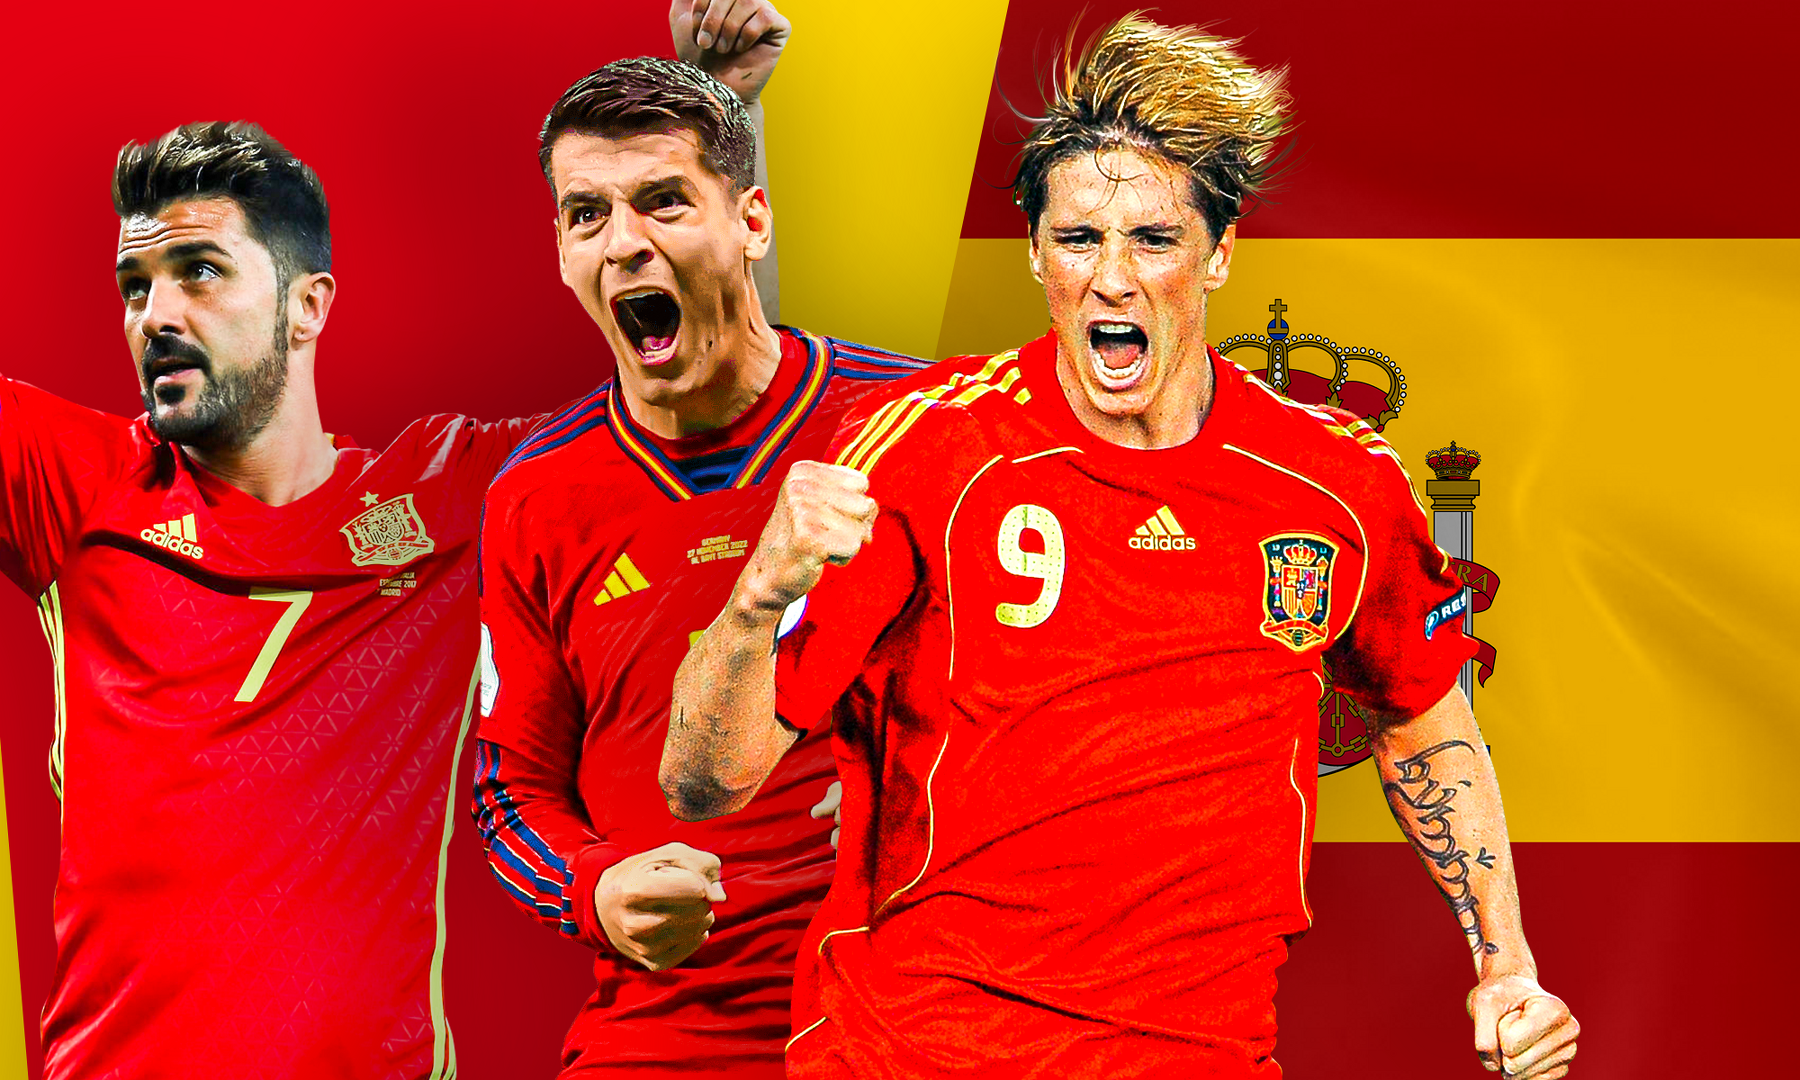 Who are the top goalscorers for Spain national football team?